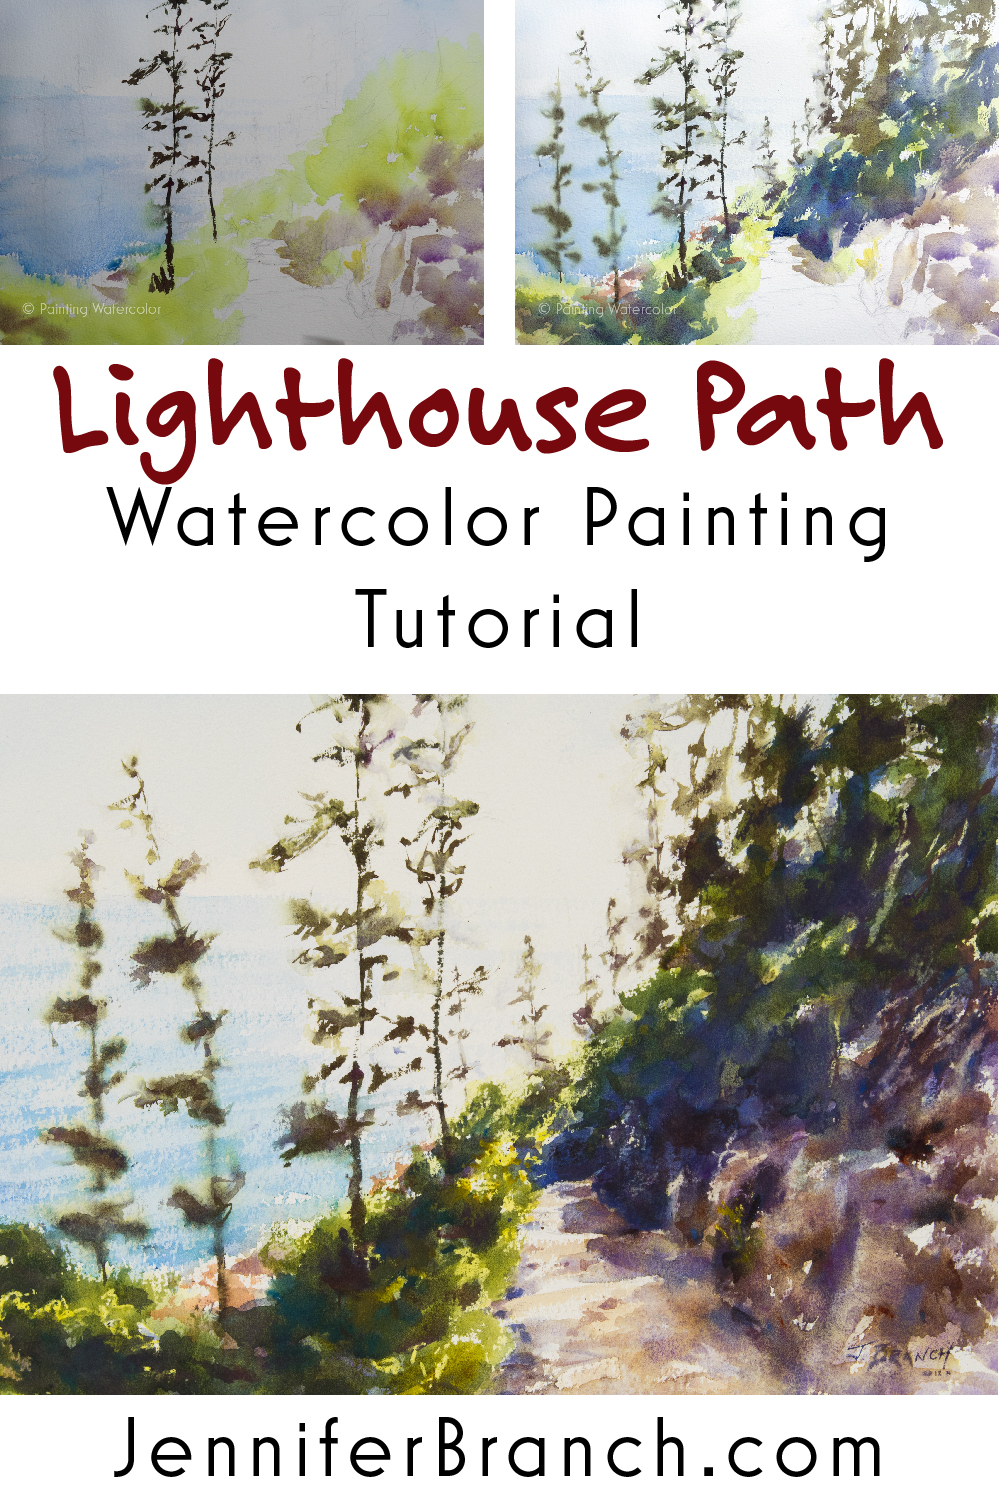 Lighthouse Path Painting Tutorial watercolor painting tutorial by Jennifer Branch